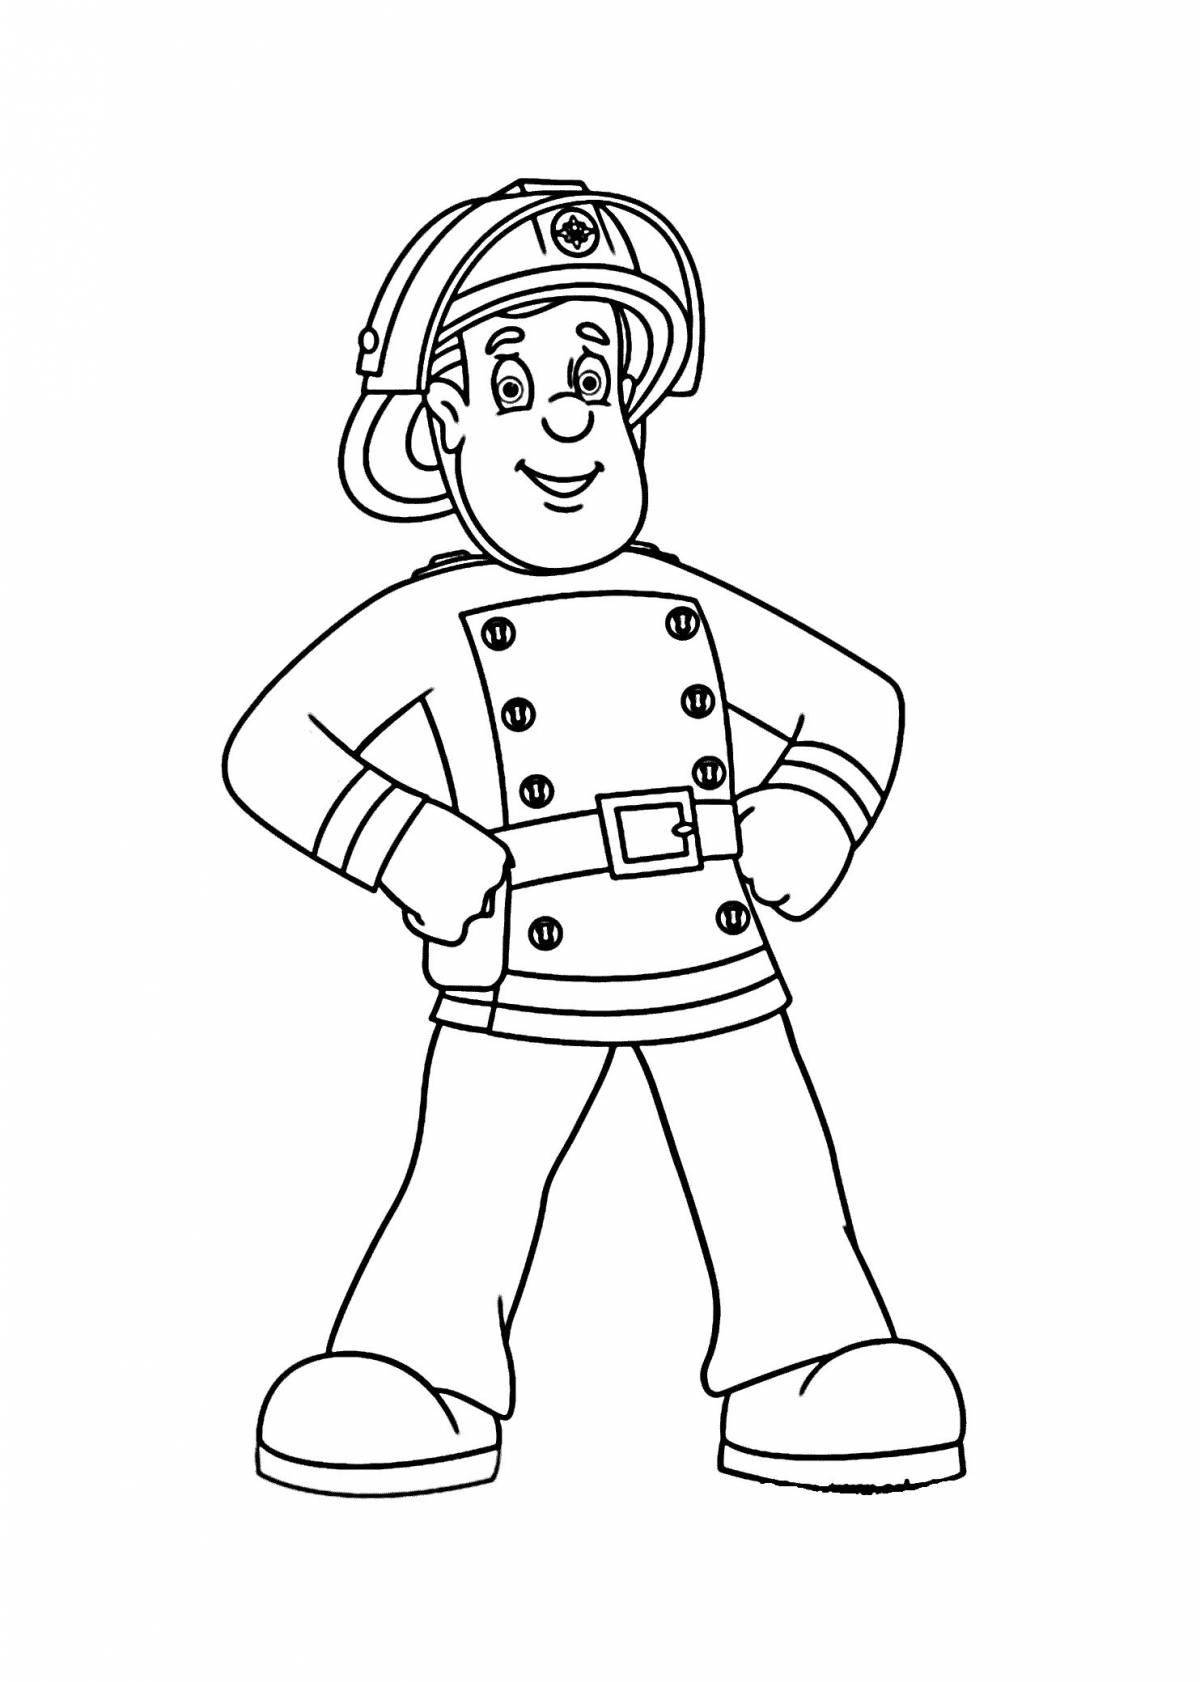 Amazing firefighter coloring pages for kids